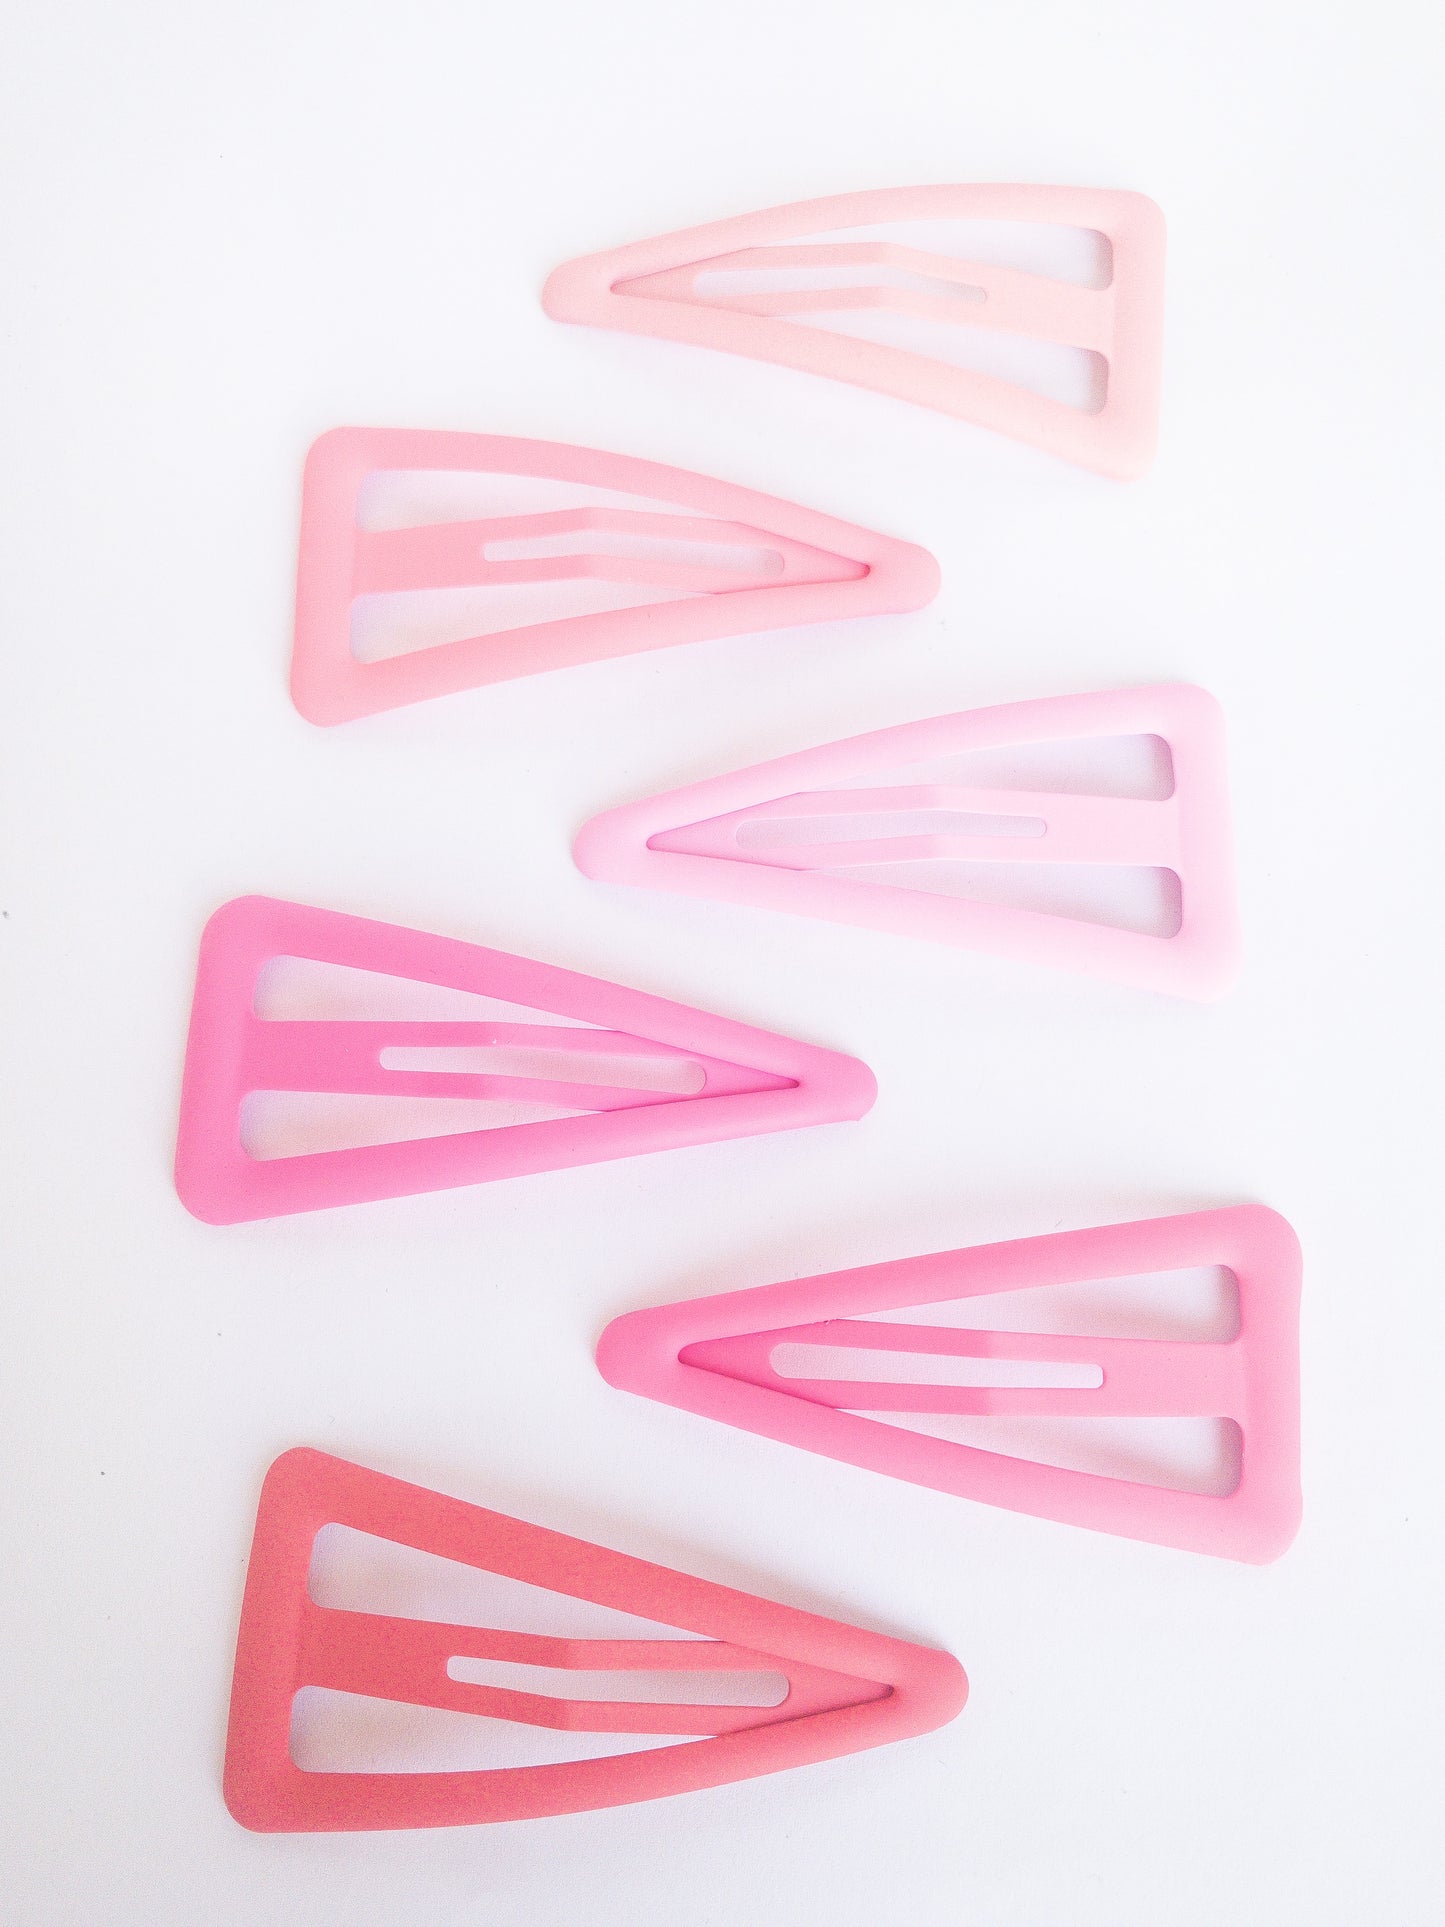 These large triangle snap clips are a fan favorite! With an ombre color palette fading from darker to lighter shades, you can mix them up and wear them together or choose your favorite of the day. Larger than your usual snap clip, these are sure to make a statement and hold your hair firm.